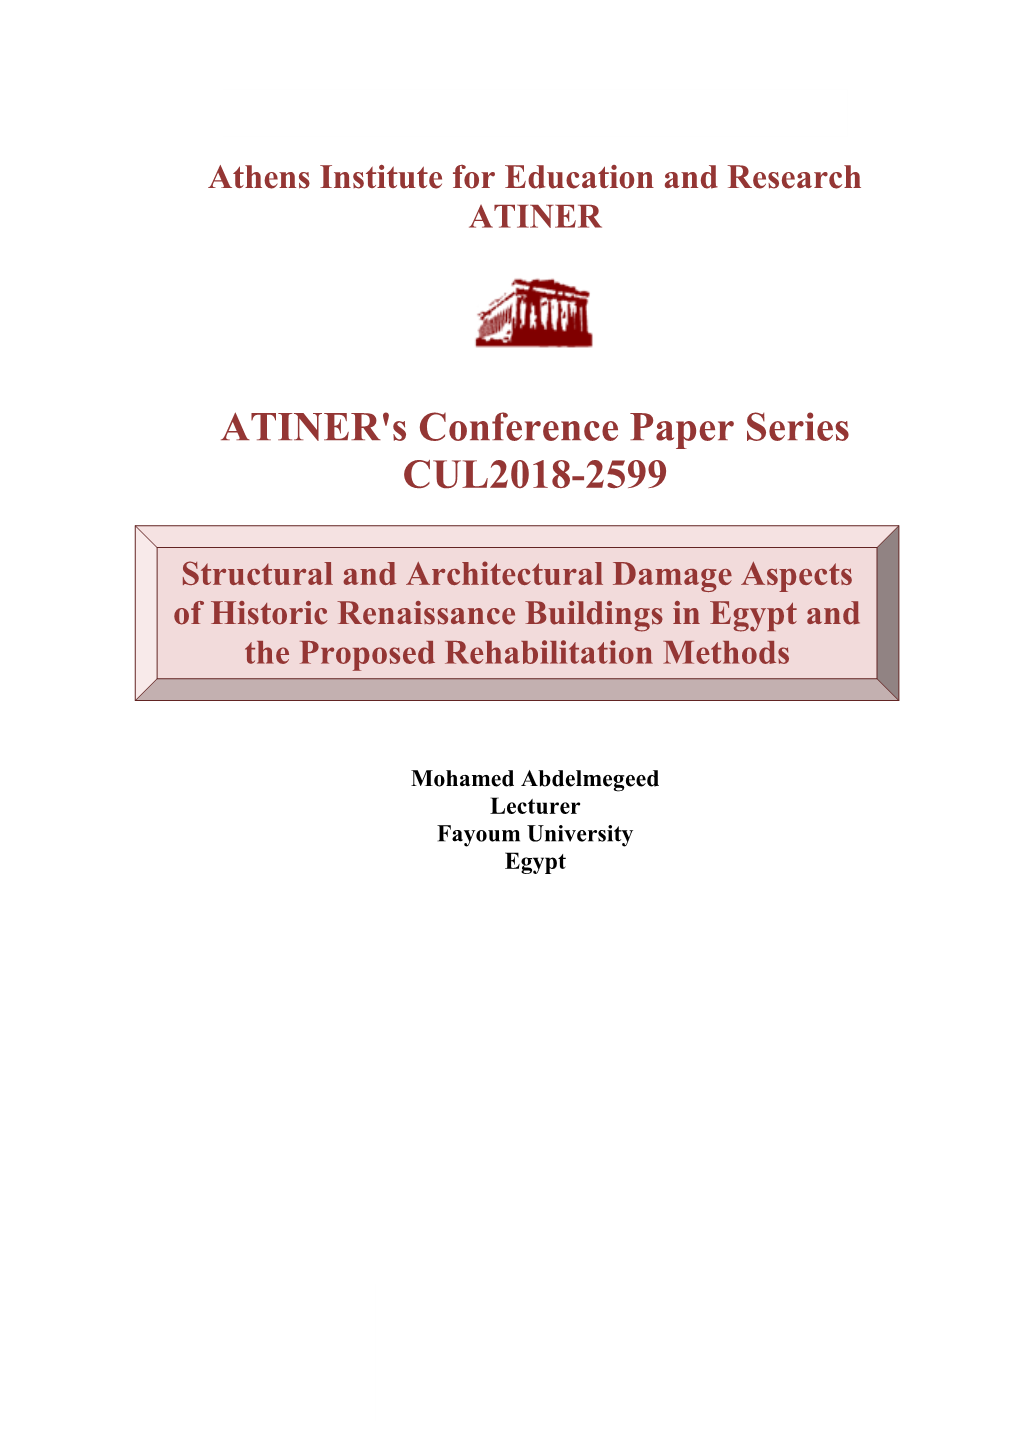 ATINER's Conference Paper Series CUL2018-2599